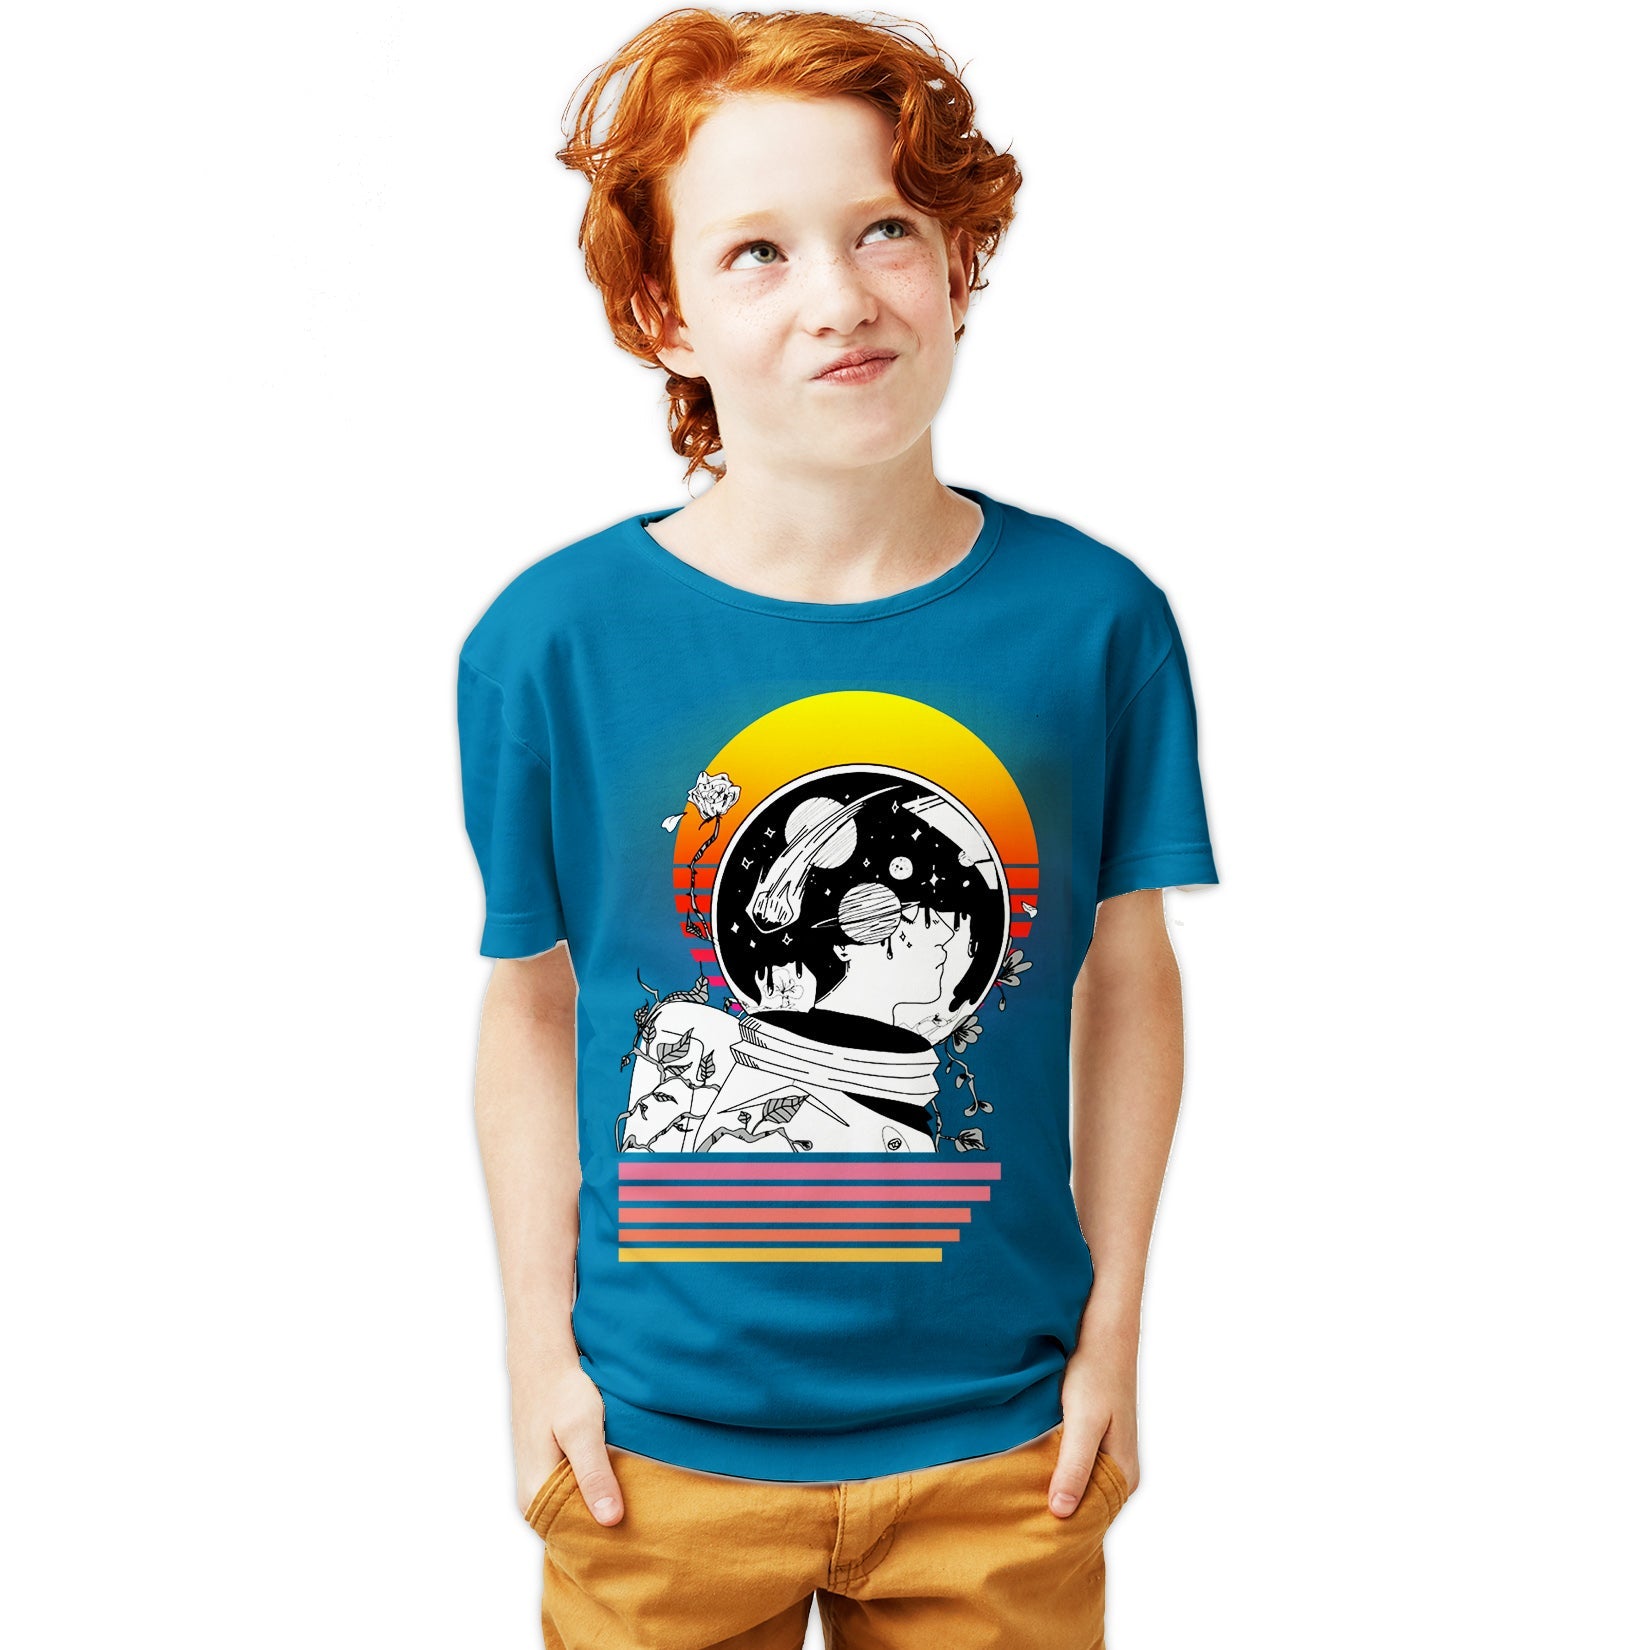 Science Space Astronaut Anime Retro Vintage Comic Nerd Geek Official Youth T-shirt